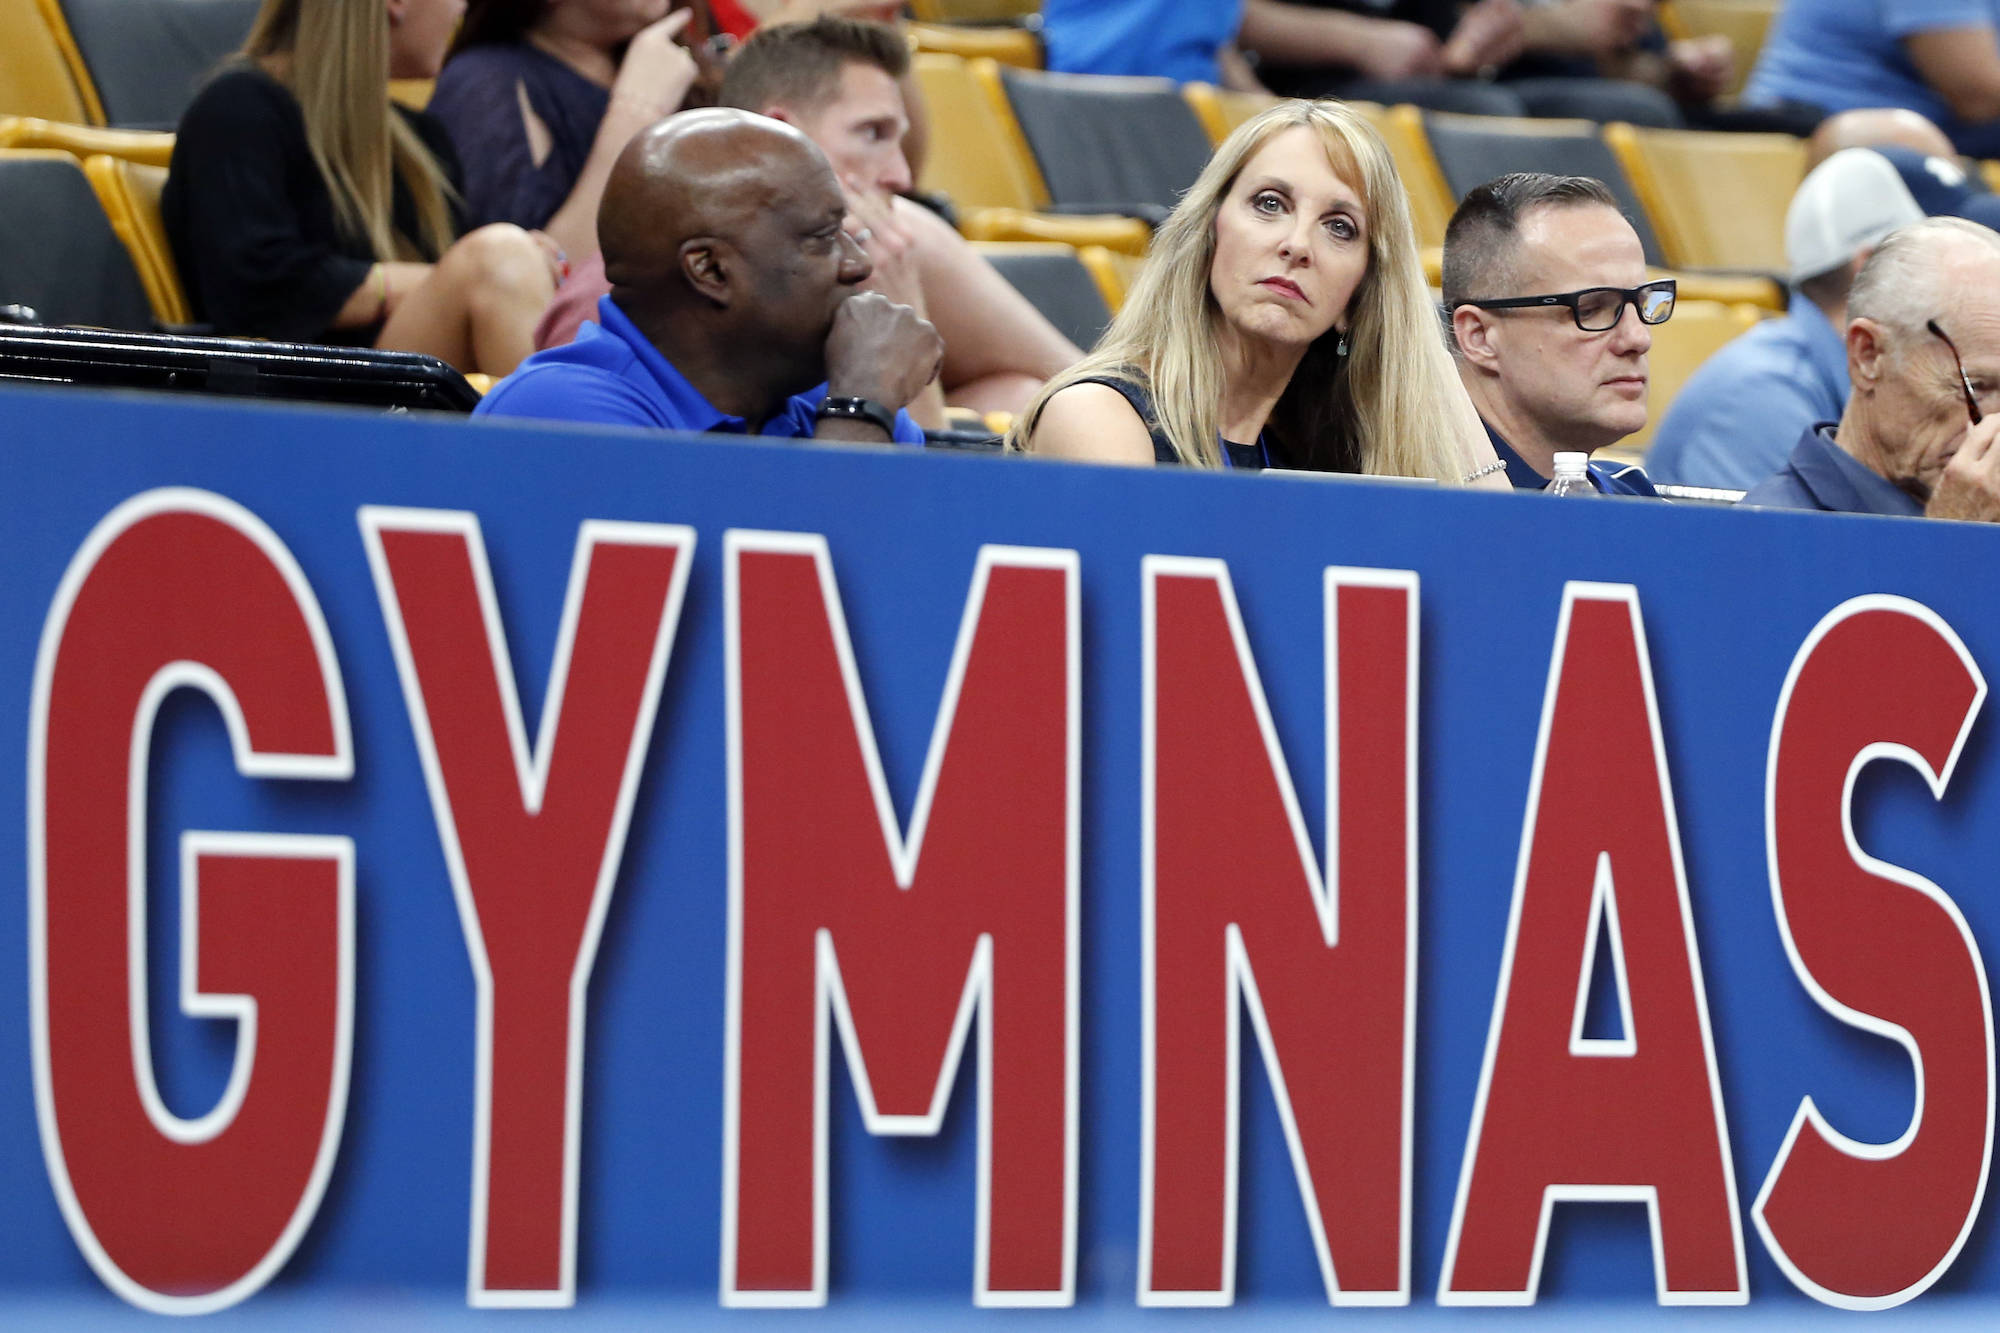 USA Gymnastics President and CEO Kerry Perry, middle, watches the U.S. Gymnastics Championships, Thursday, Aug. 16, 2018, in Boston. (AP Photo/Elise Amendola)